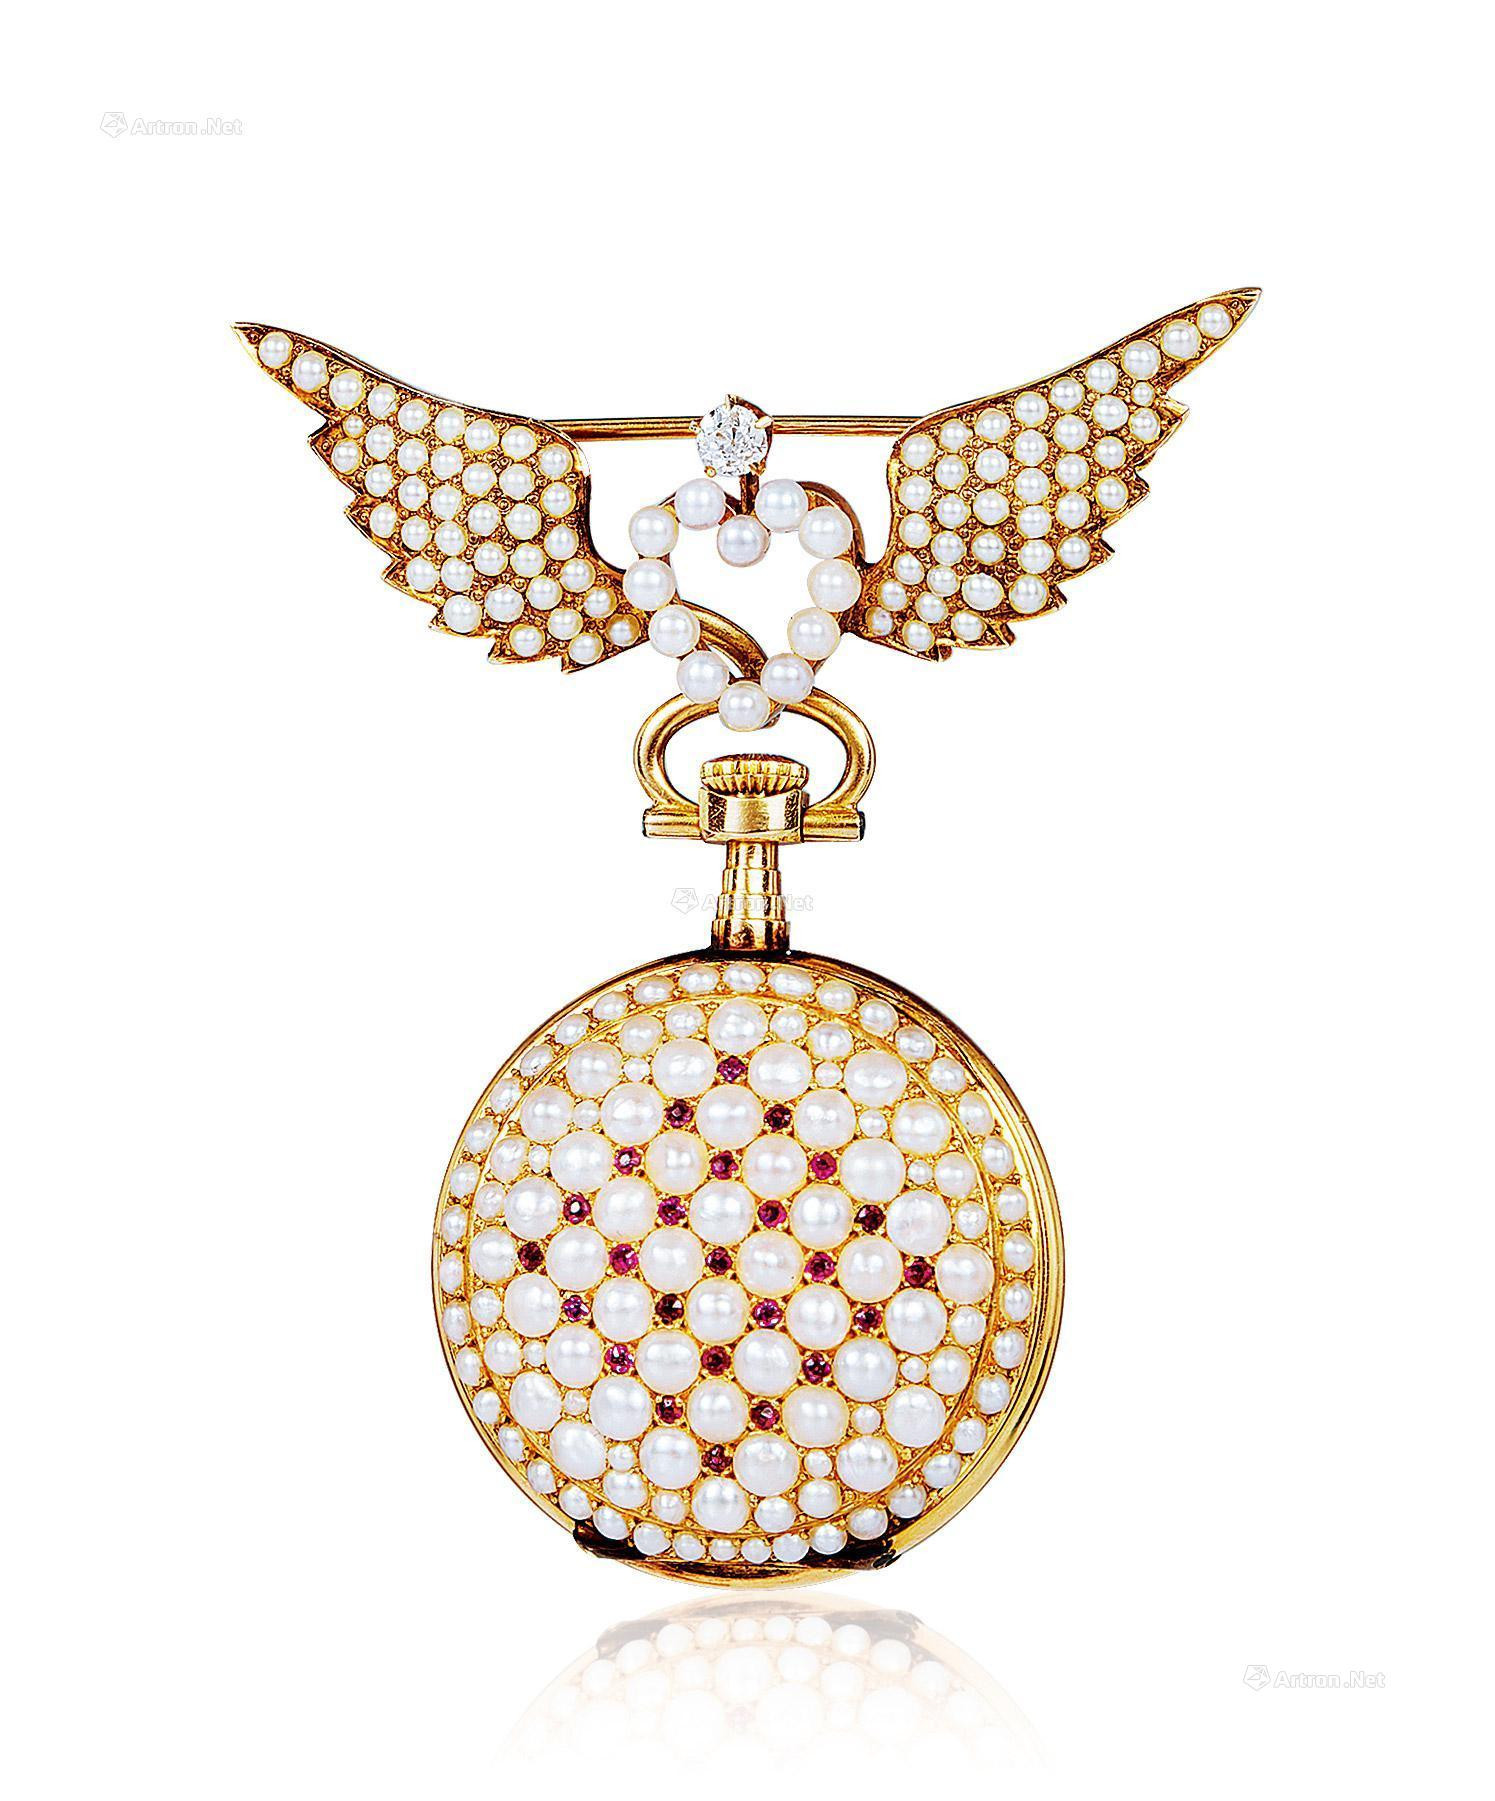 BAILEY BANKS & BIDDLE CO. A YELLOW GOLD， PEARL， RUBY-SET BROOCH STYLE POCKET WATCH WITH ENAMEL DIAL